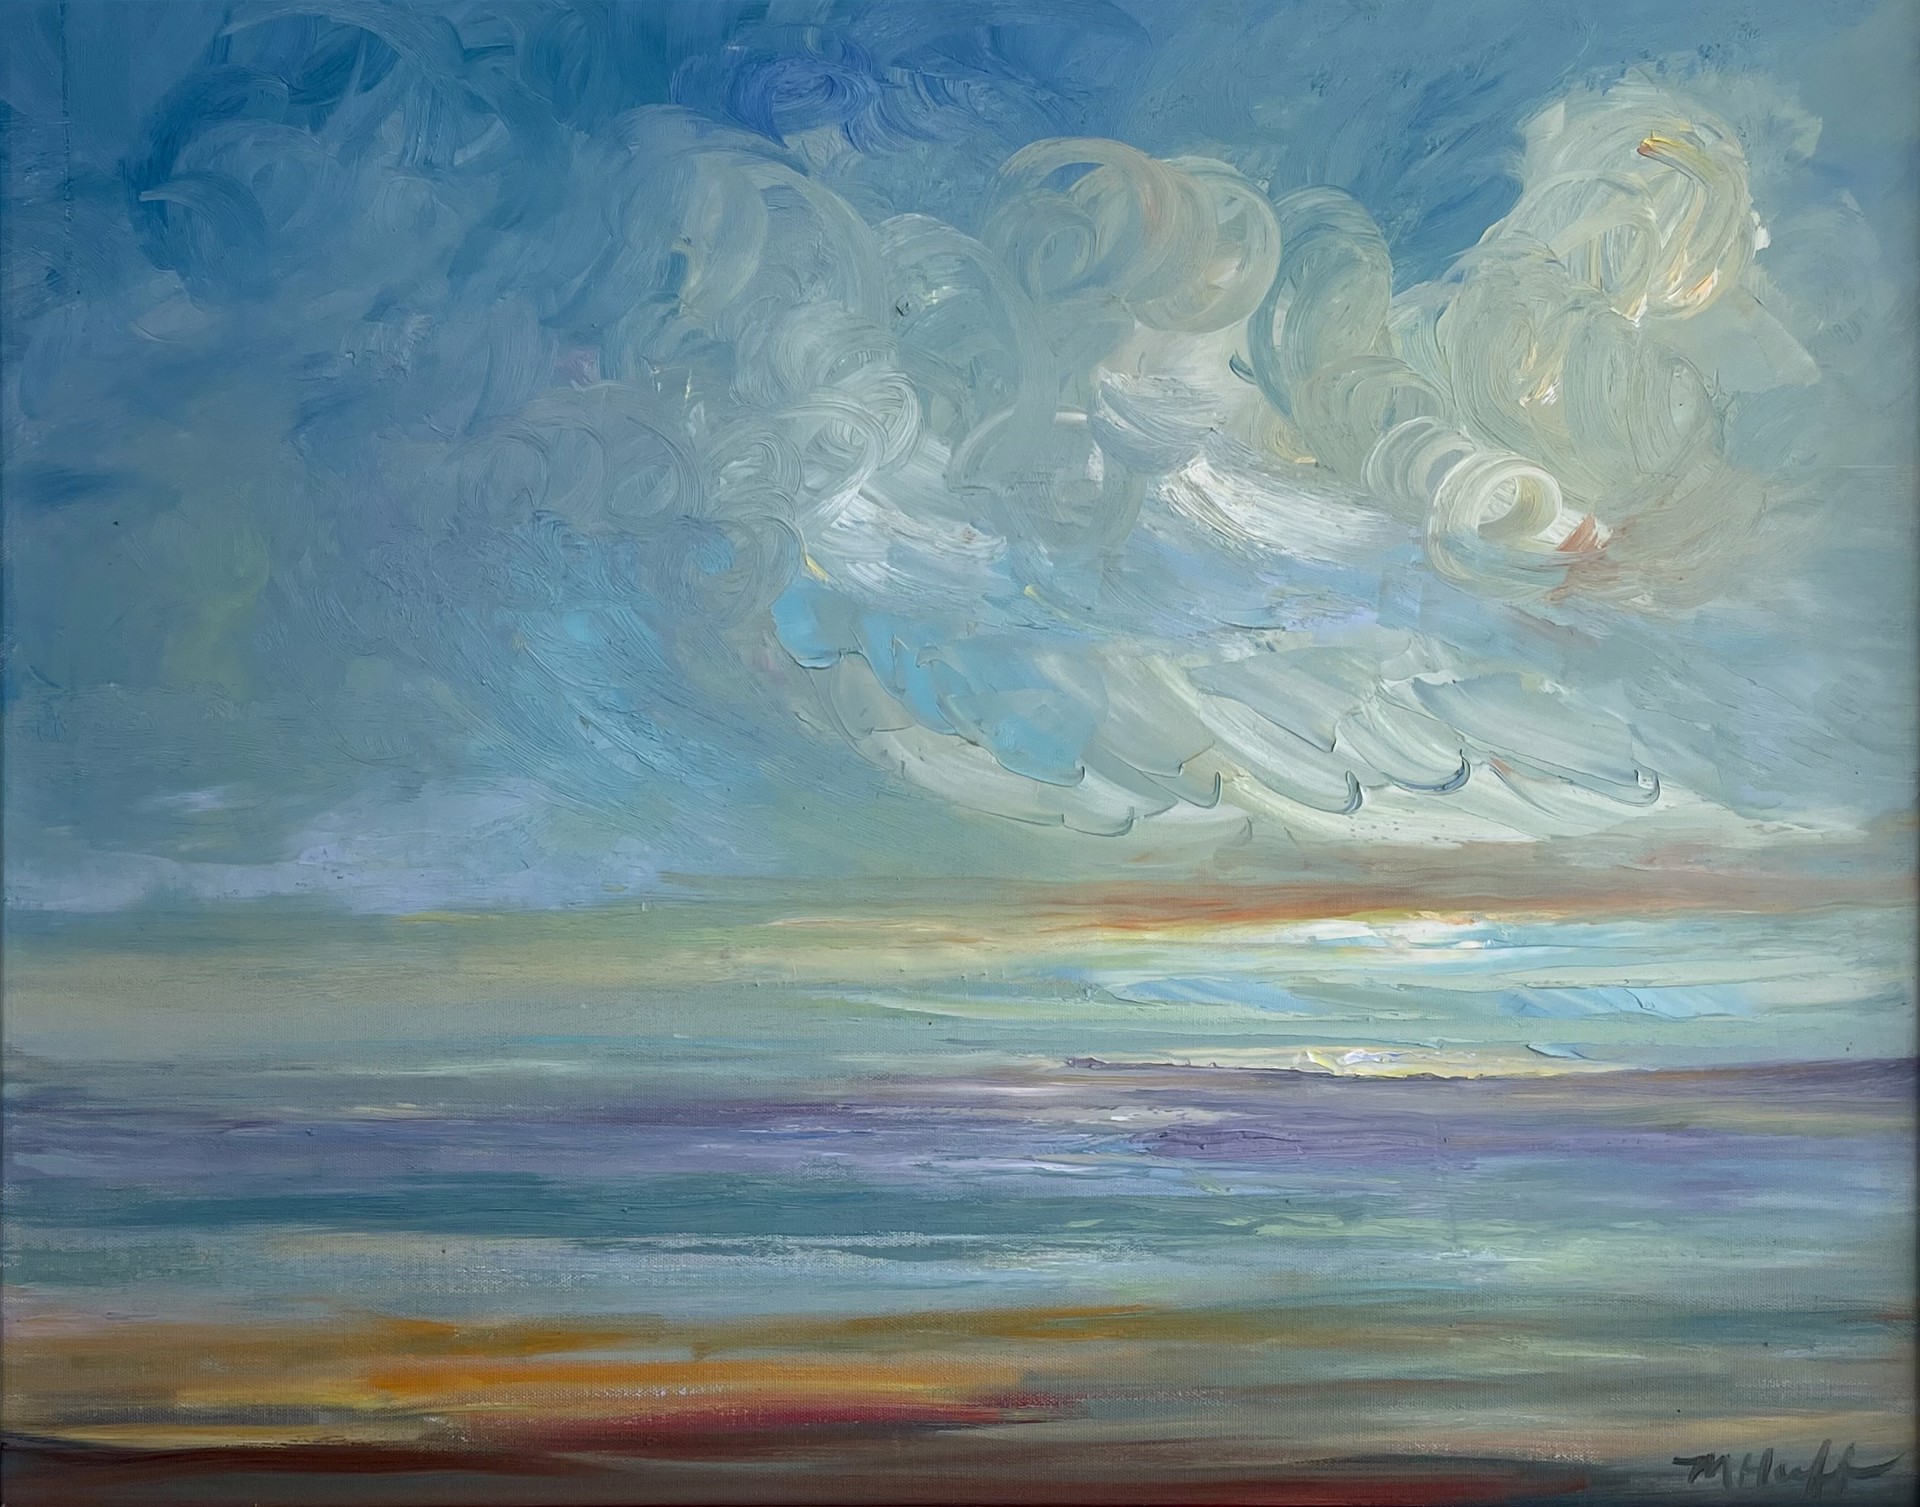 Windy Clouds by Maudie Huff